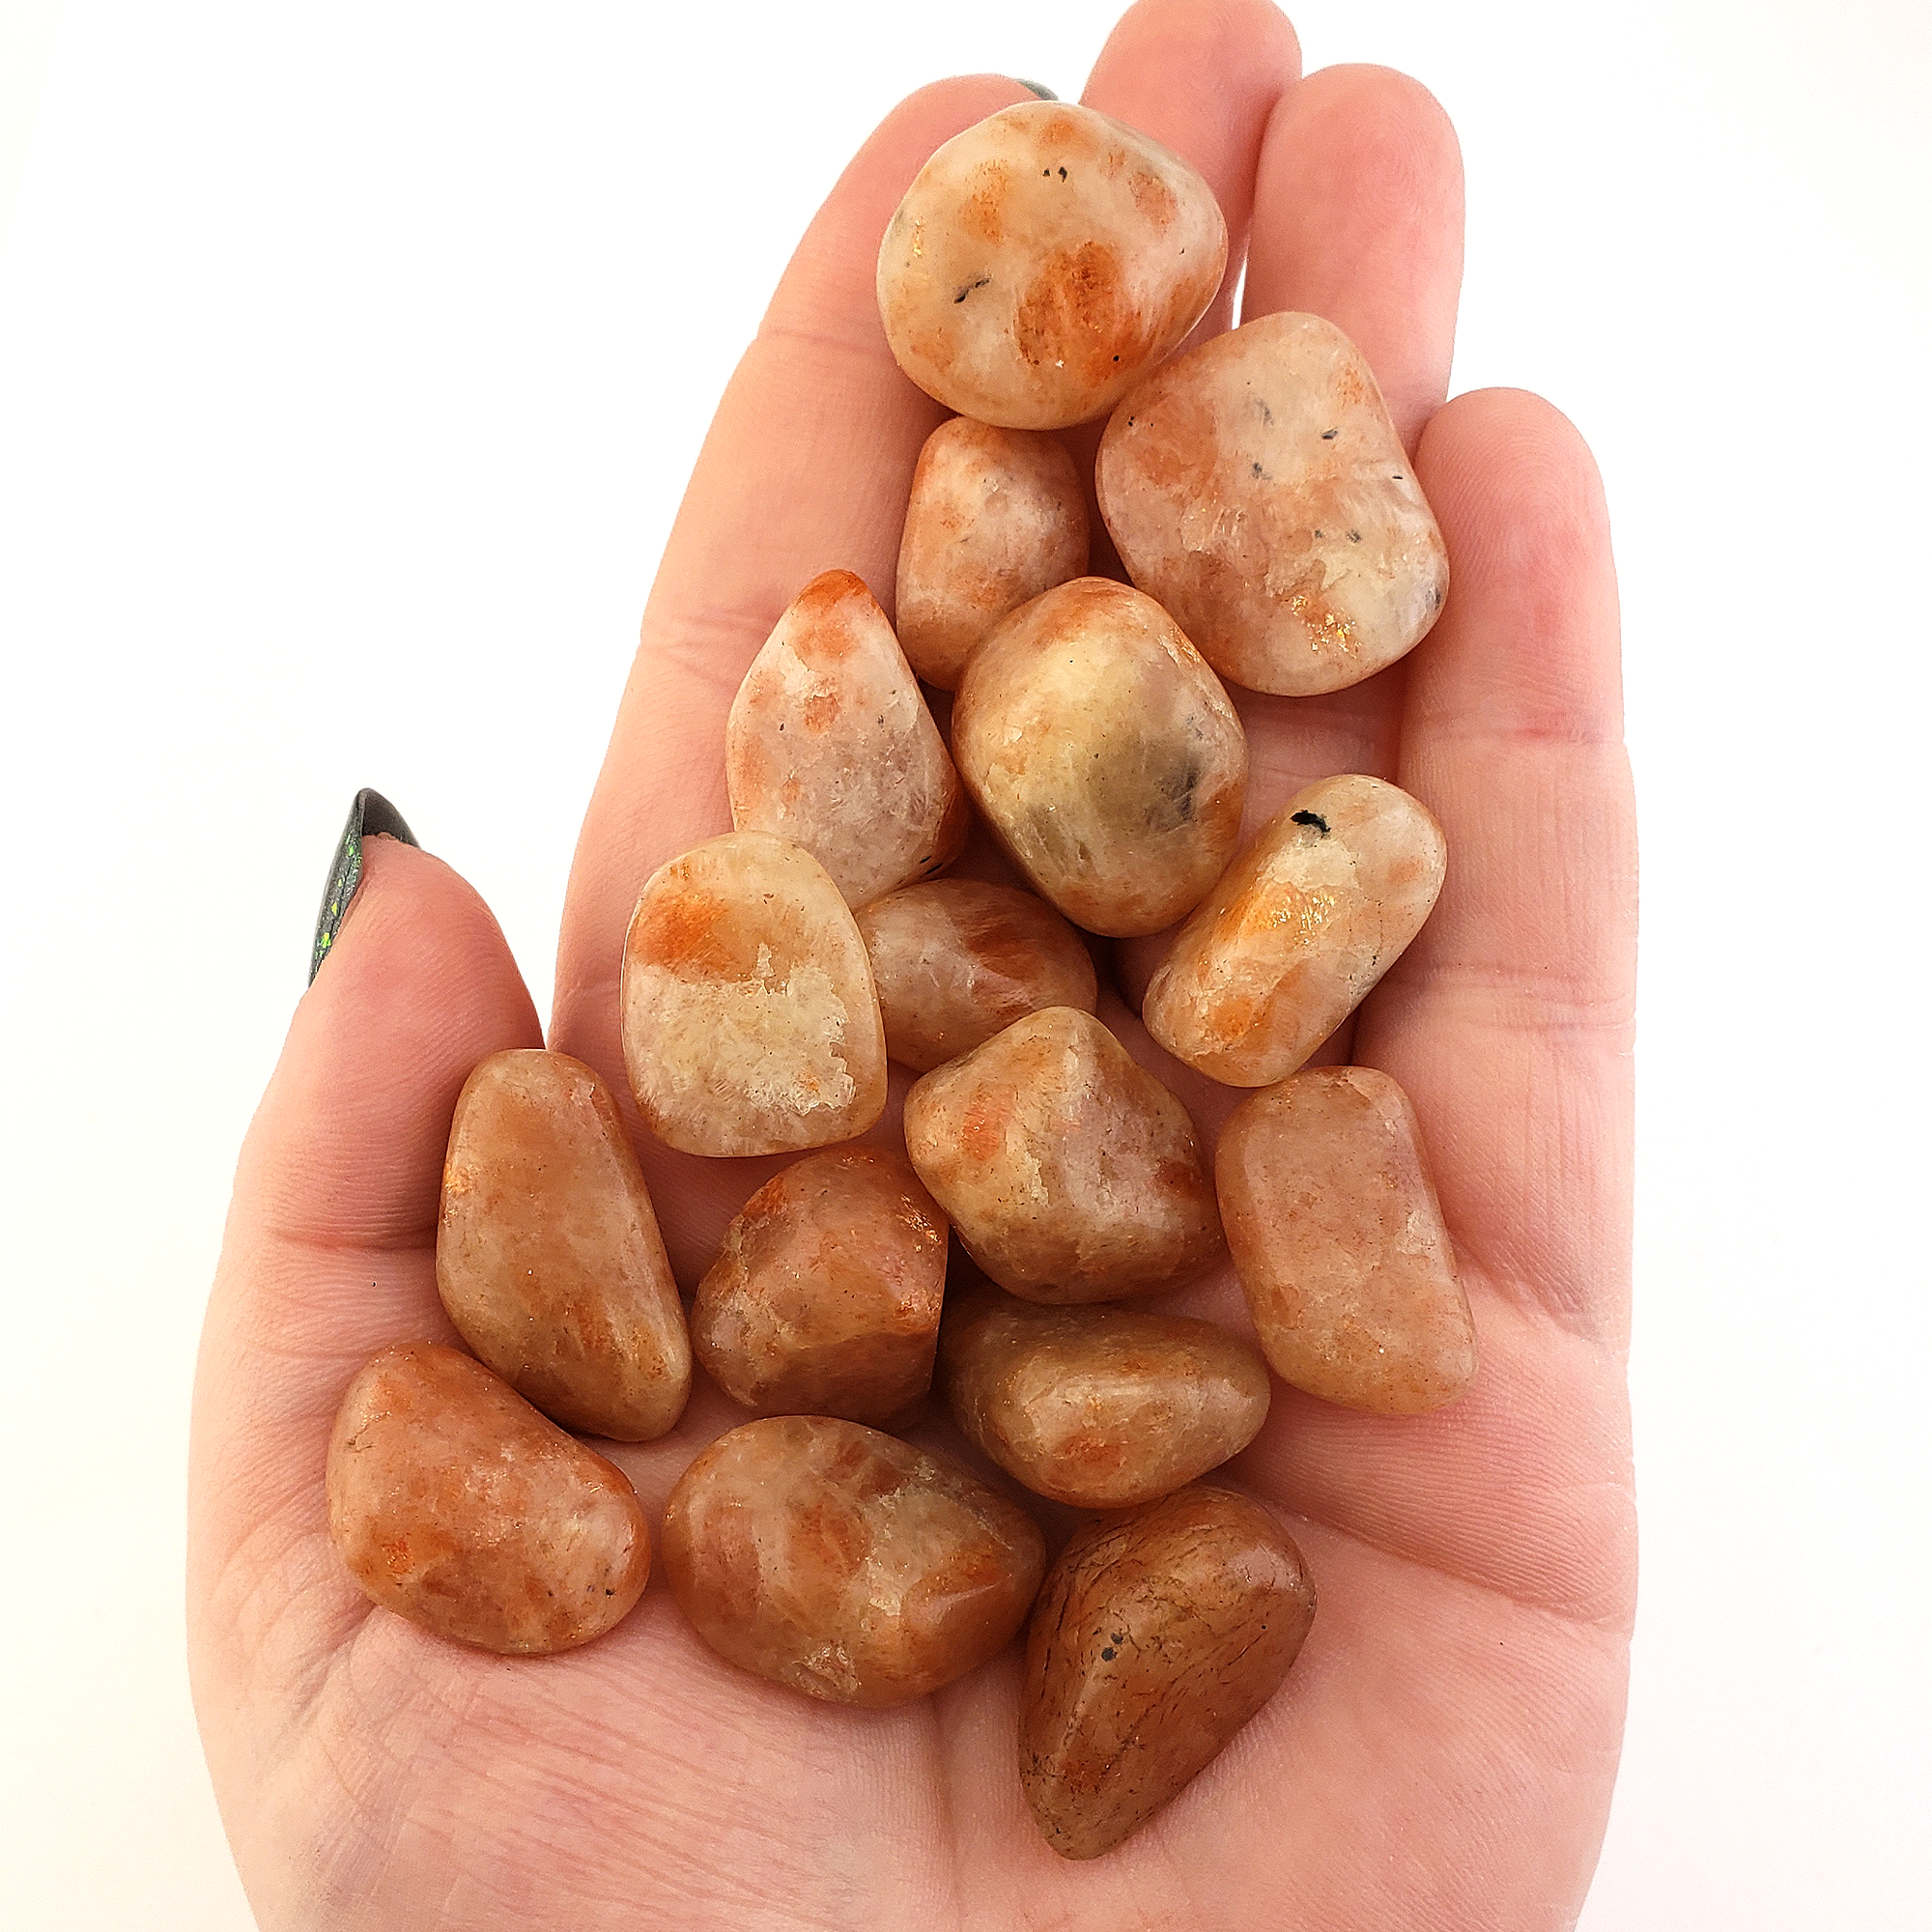 Sunstone Natural Tumbled Stone - Small One Stone - In Hand, White Background